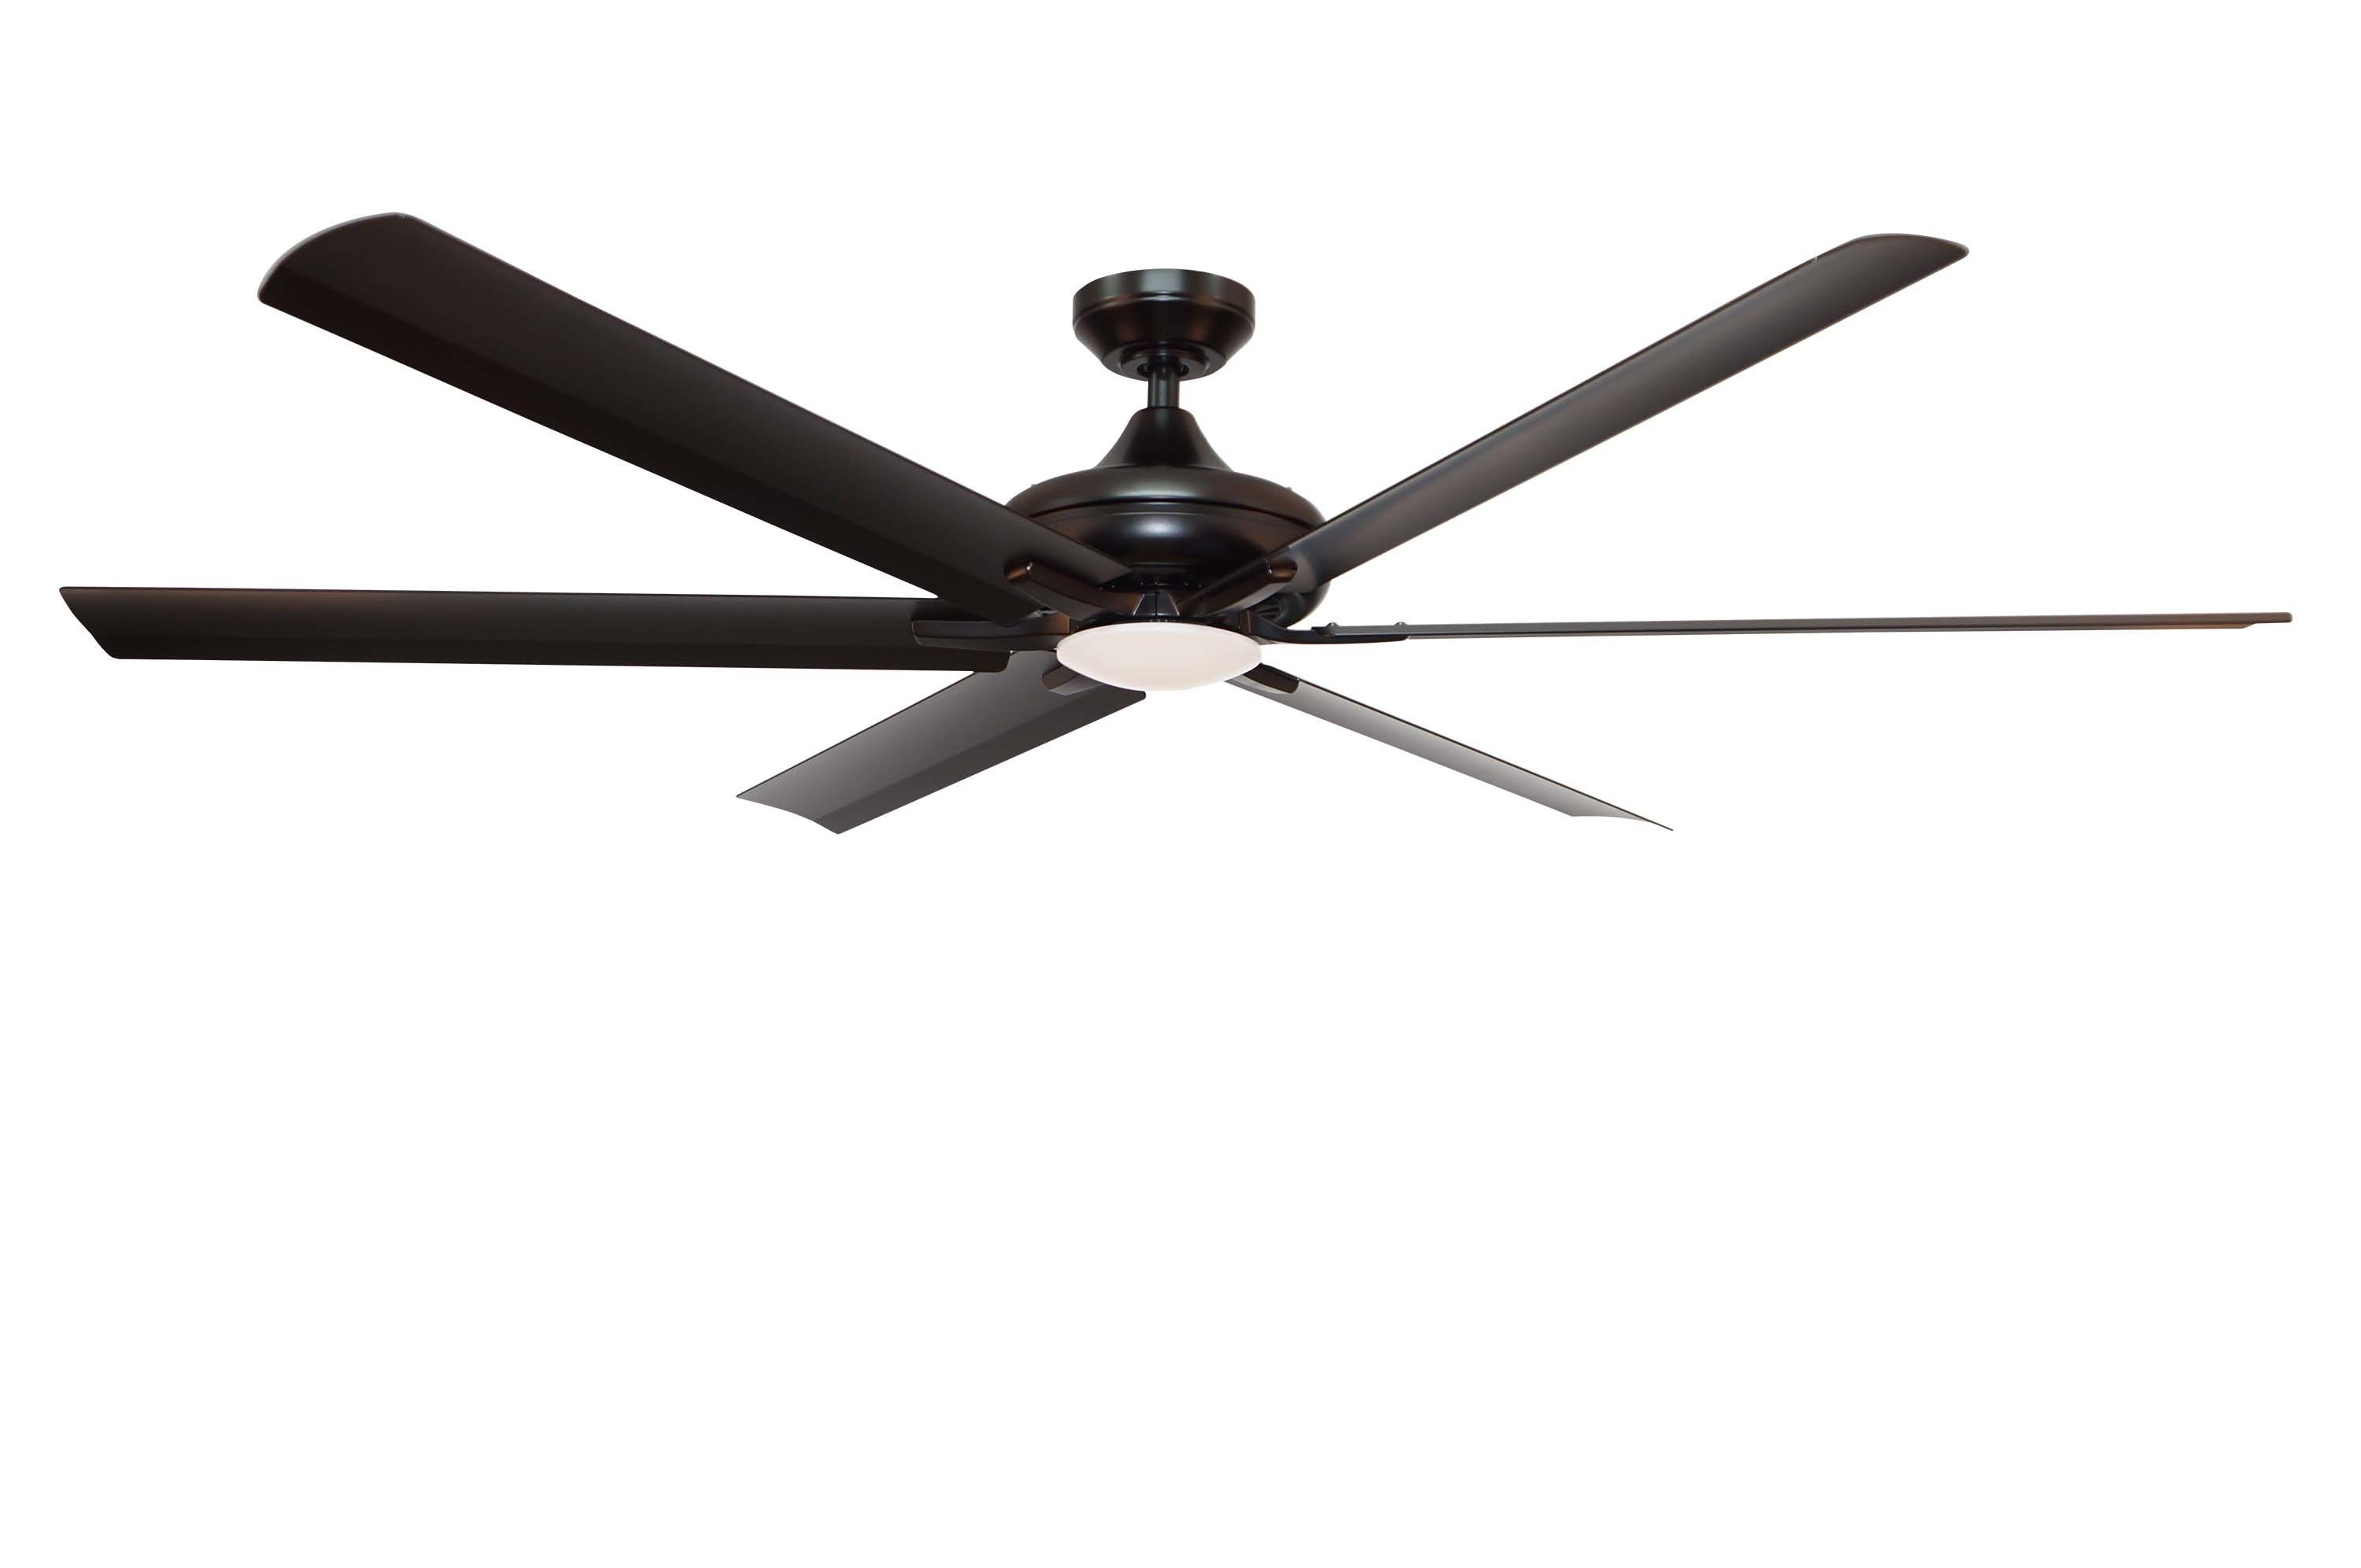 Joanne Windmill 15 Blade Ceiling Fans Intended For Most Recent Darby Home Co 70" Ayling 6 Blade Ceiling Fan With Remote, Light Kit Included (View 19 of 20)